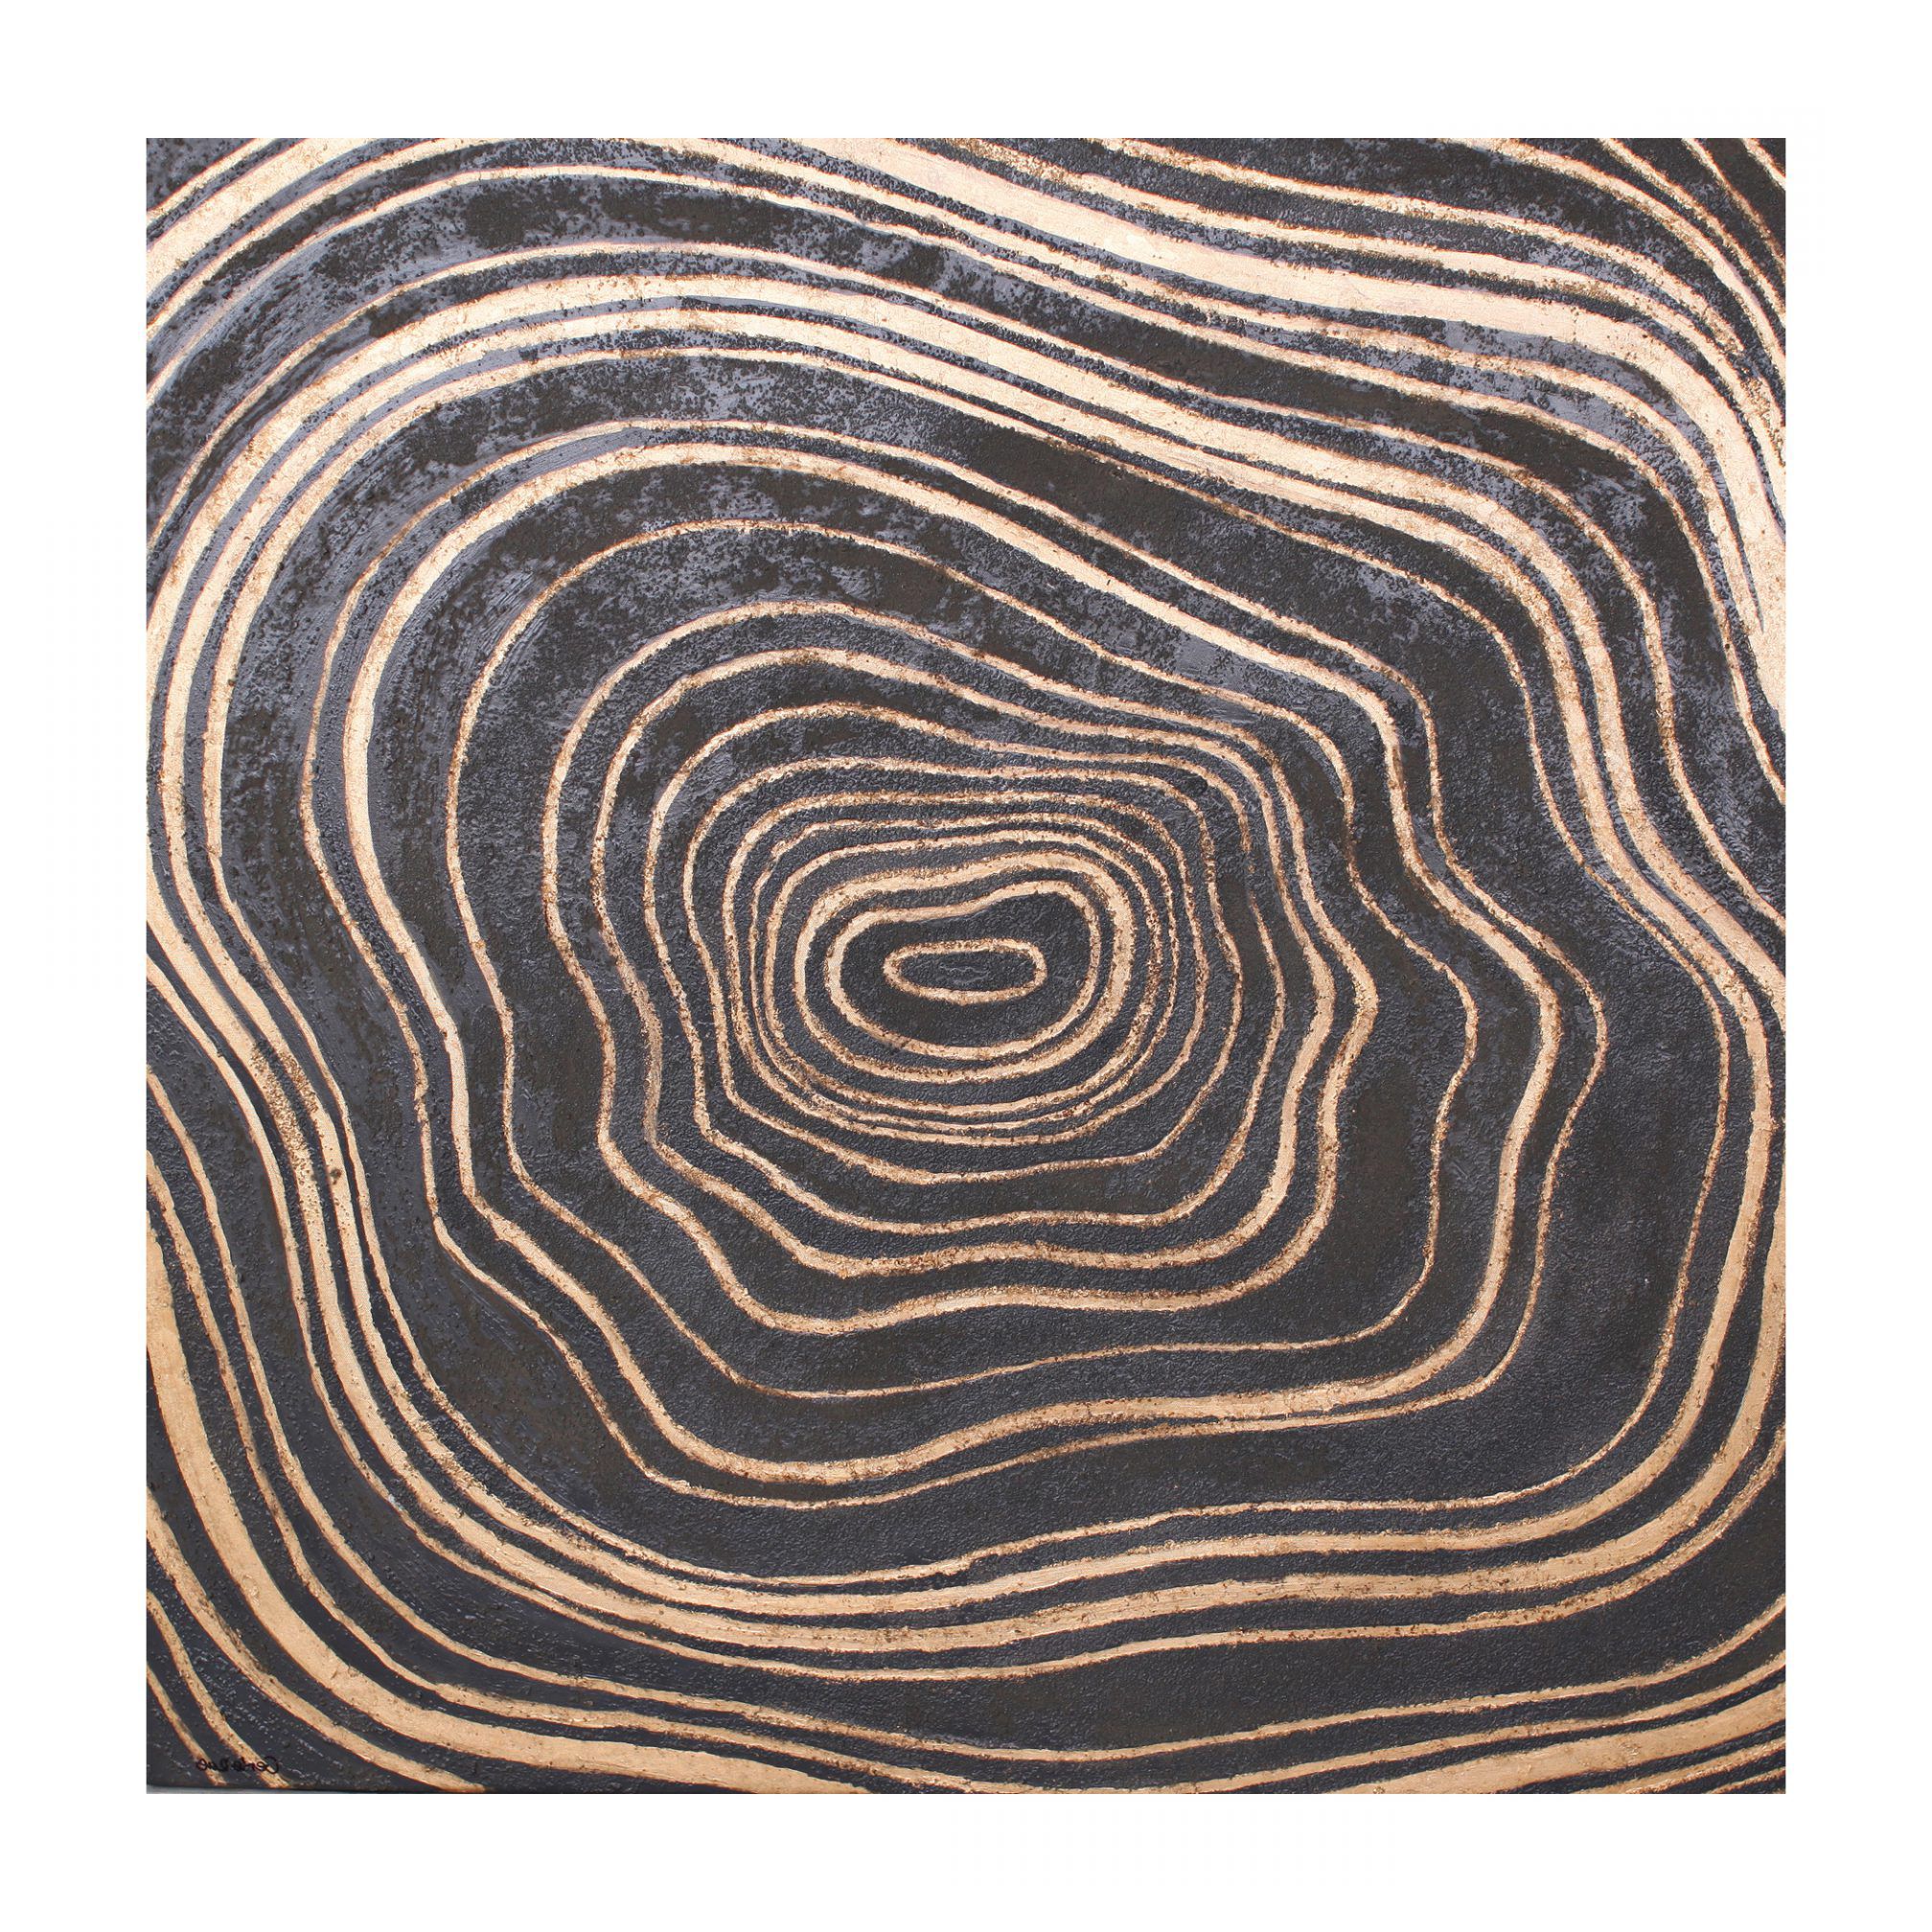 Famous Rings Wall Decor Intended For Tree Rings Wall Decor – Peter Corvallis Productions (View 13 of 20)